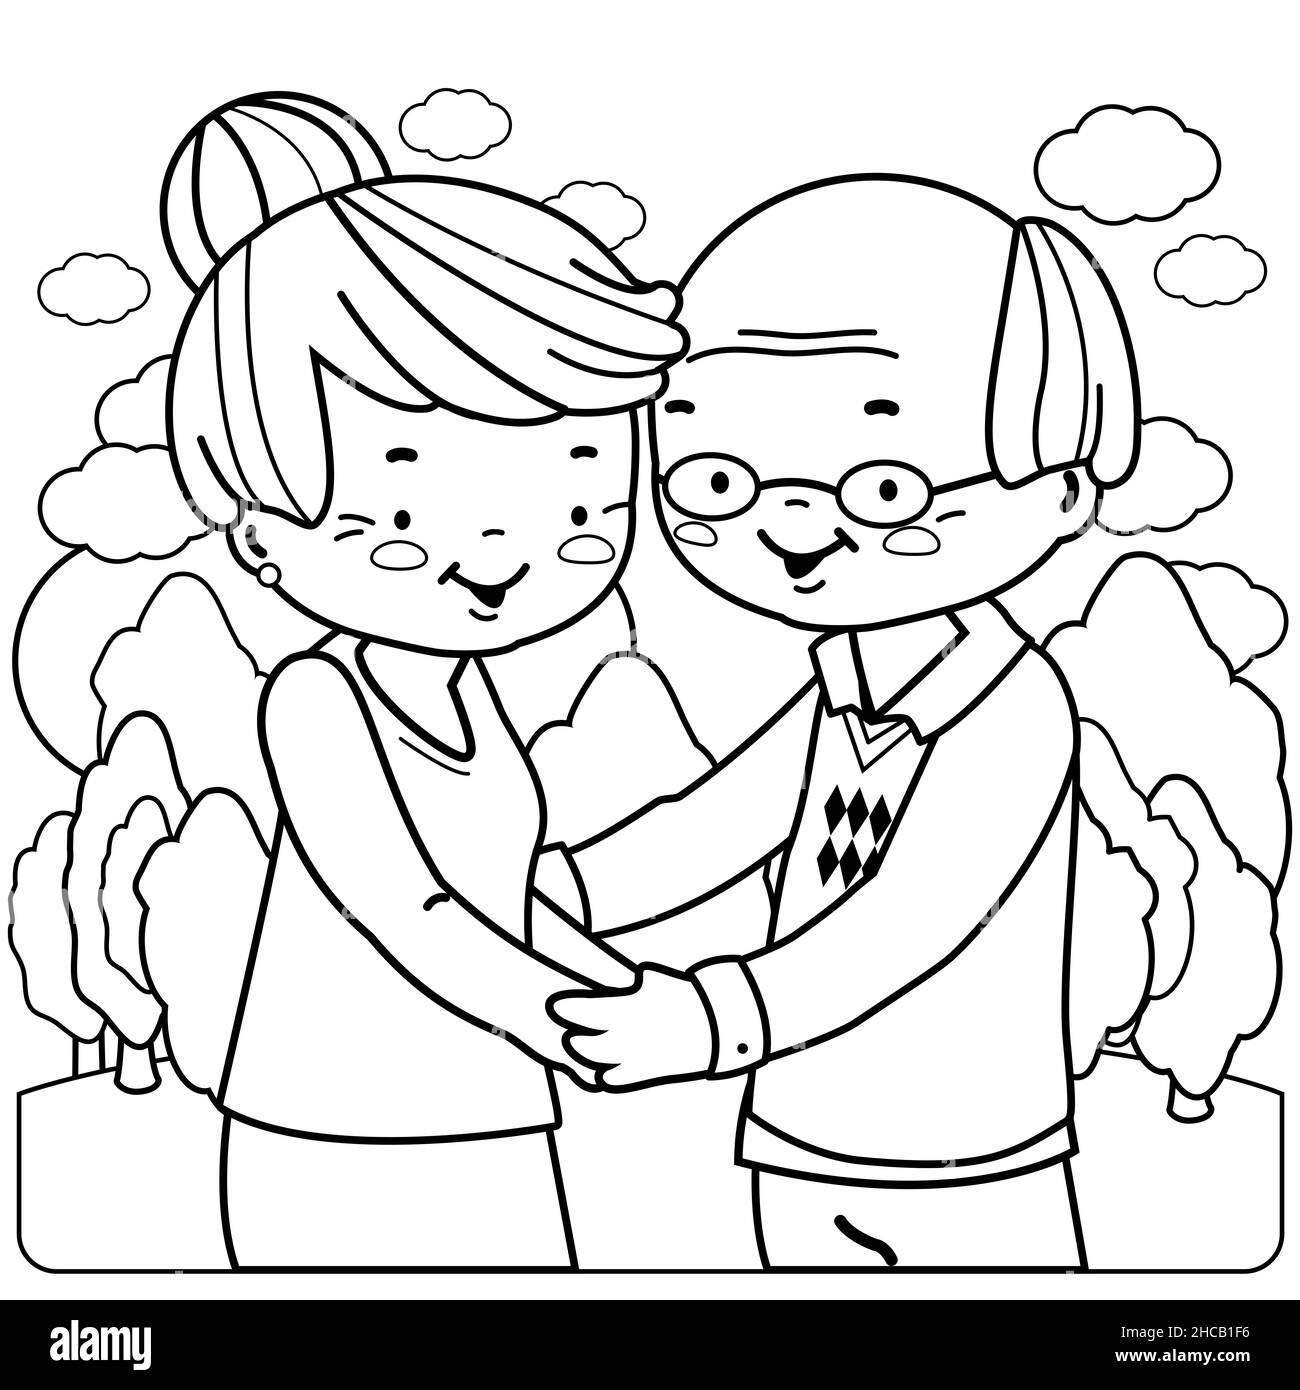 An old man and an old woman holding hands at the park. Black and white coloring page. Stock Photo